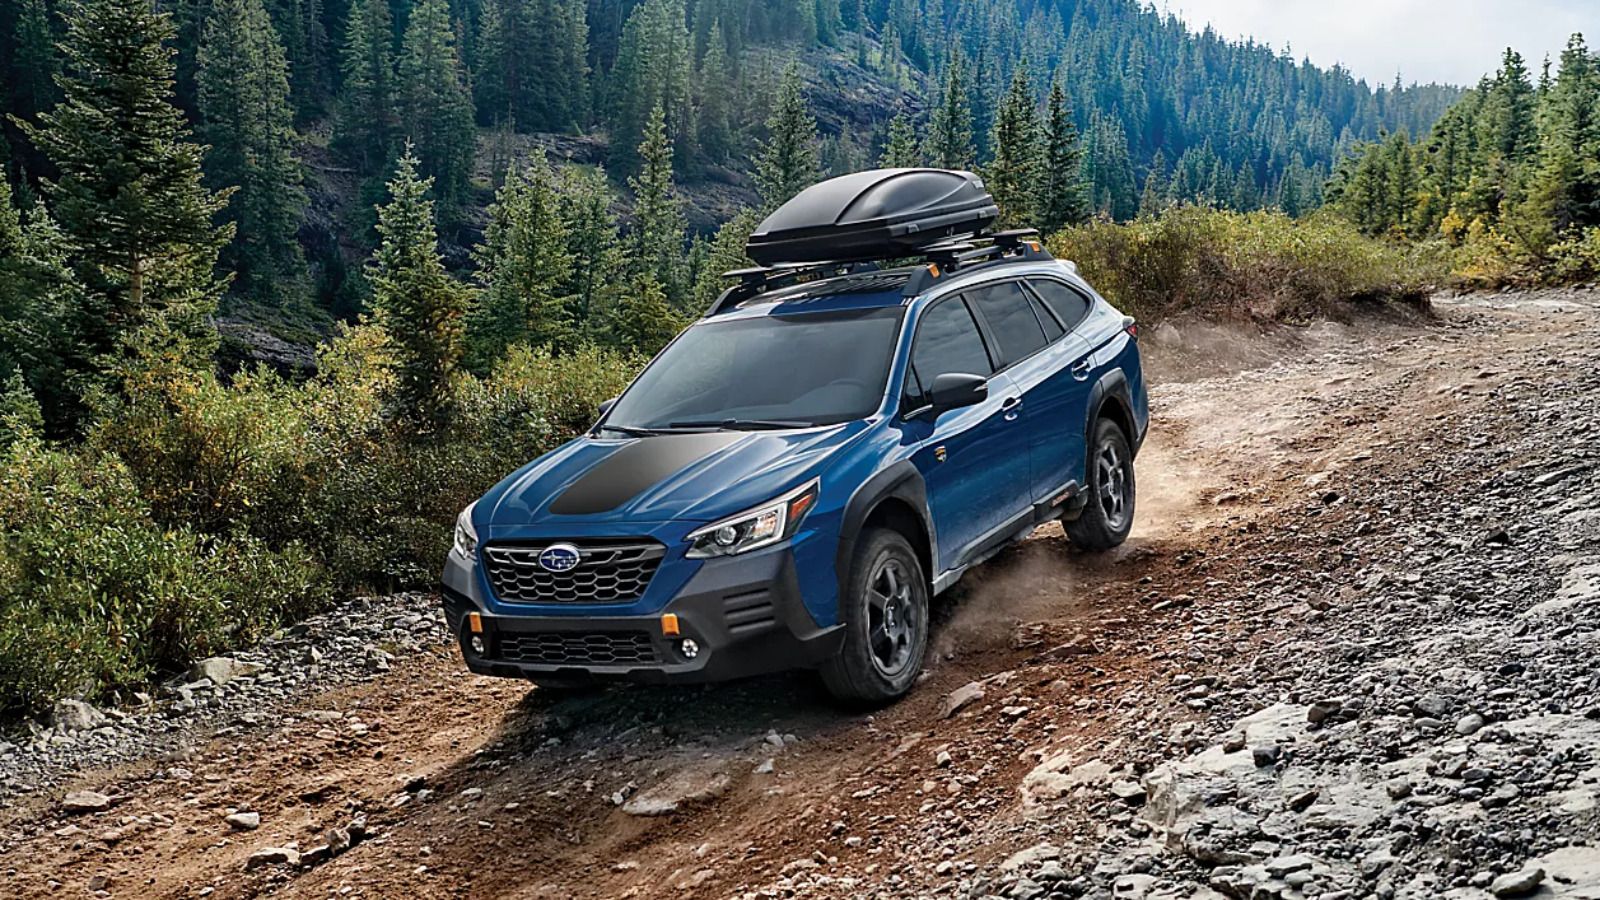 Blue Outback midsize SUV driving